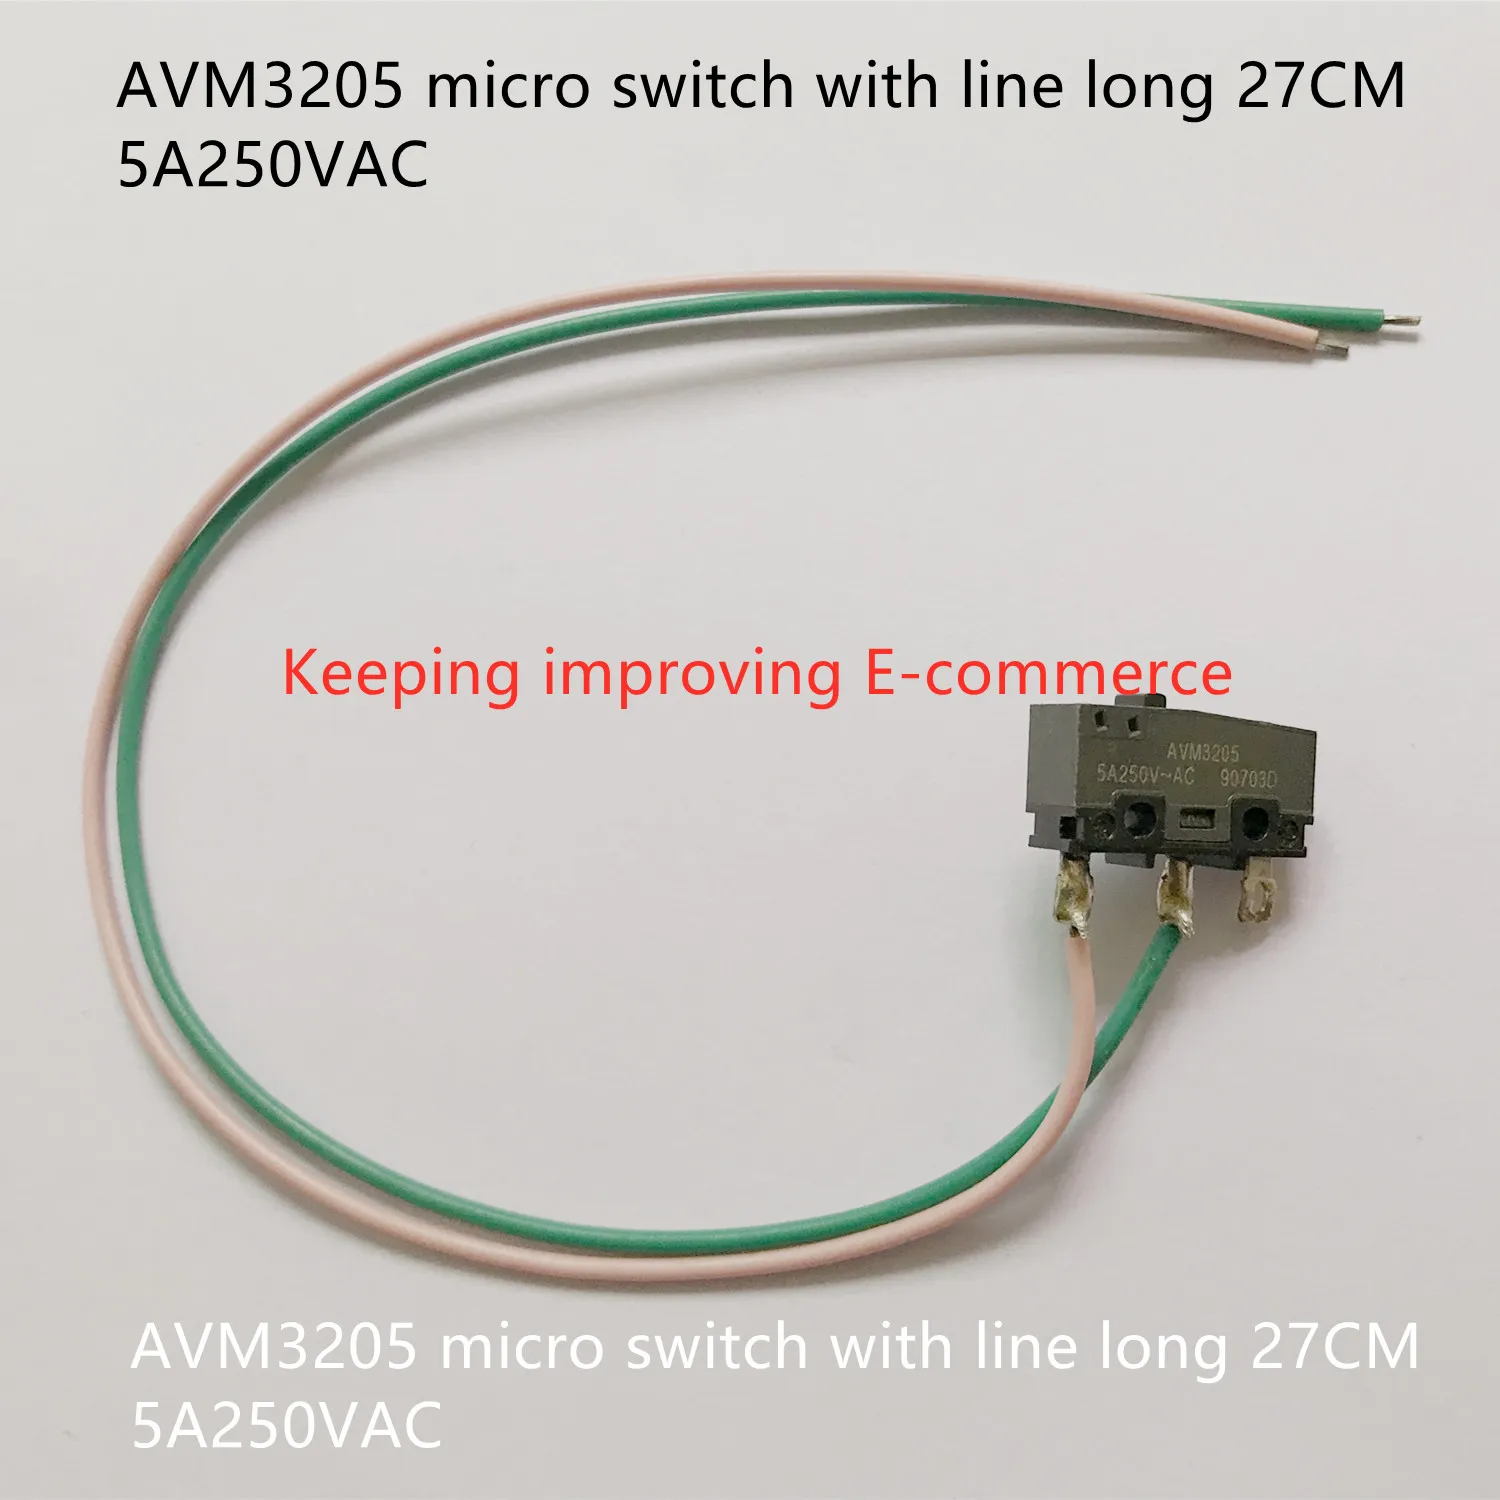 Original new 100% AVM3205 micro switch with line long 27CM 5A250VAC